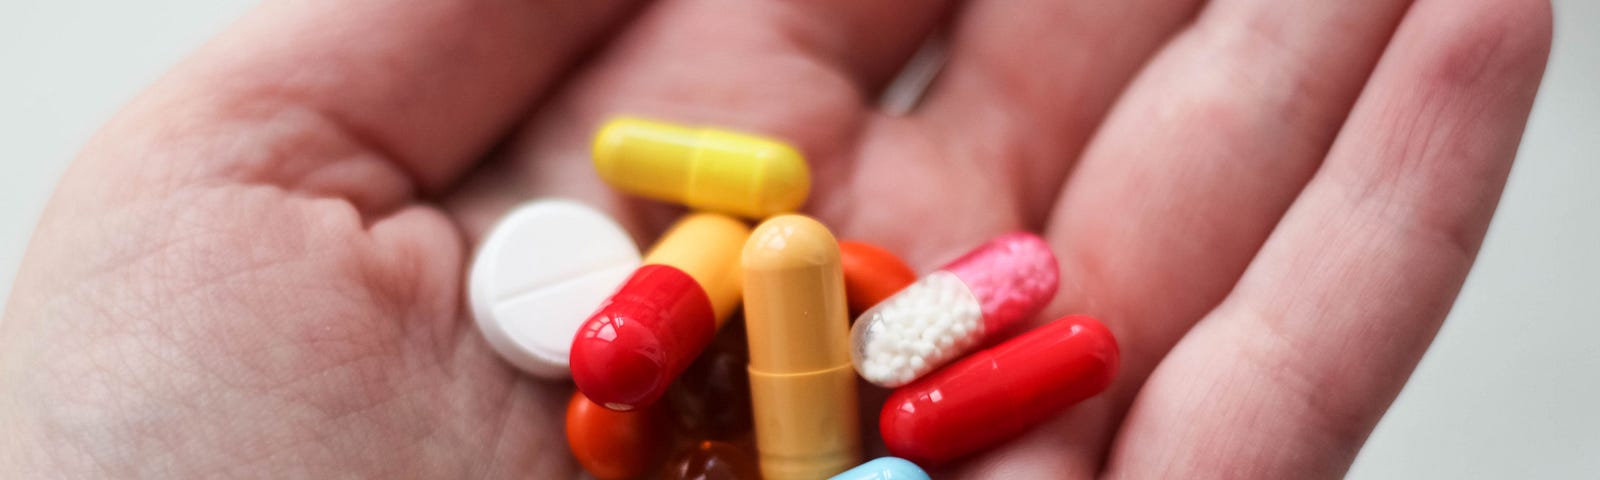 A palm holding a pile of multicoloured tablets and pills